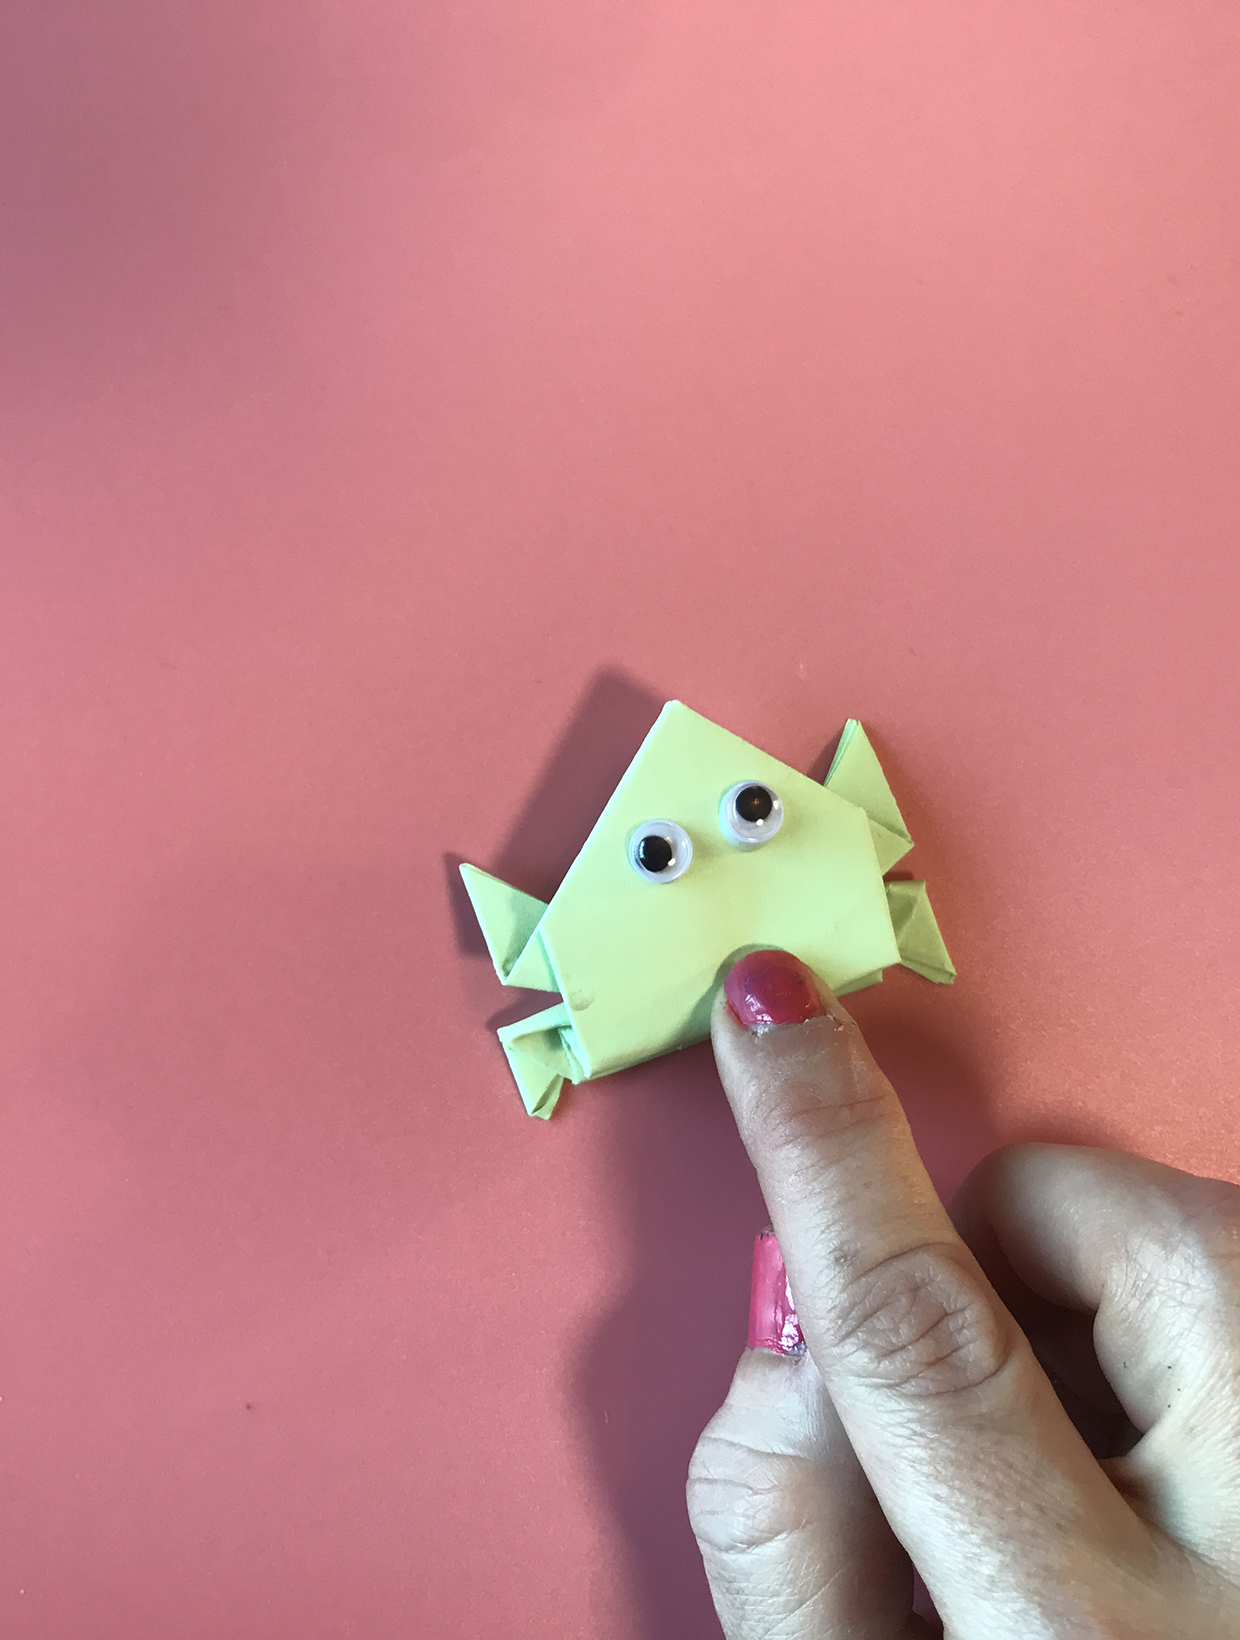 How to Make an Origami Jumping Frog: 13 Steps (with Images)